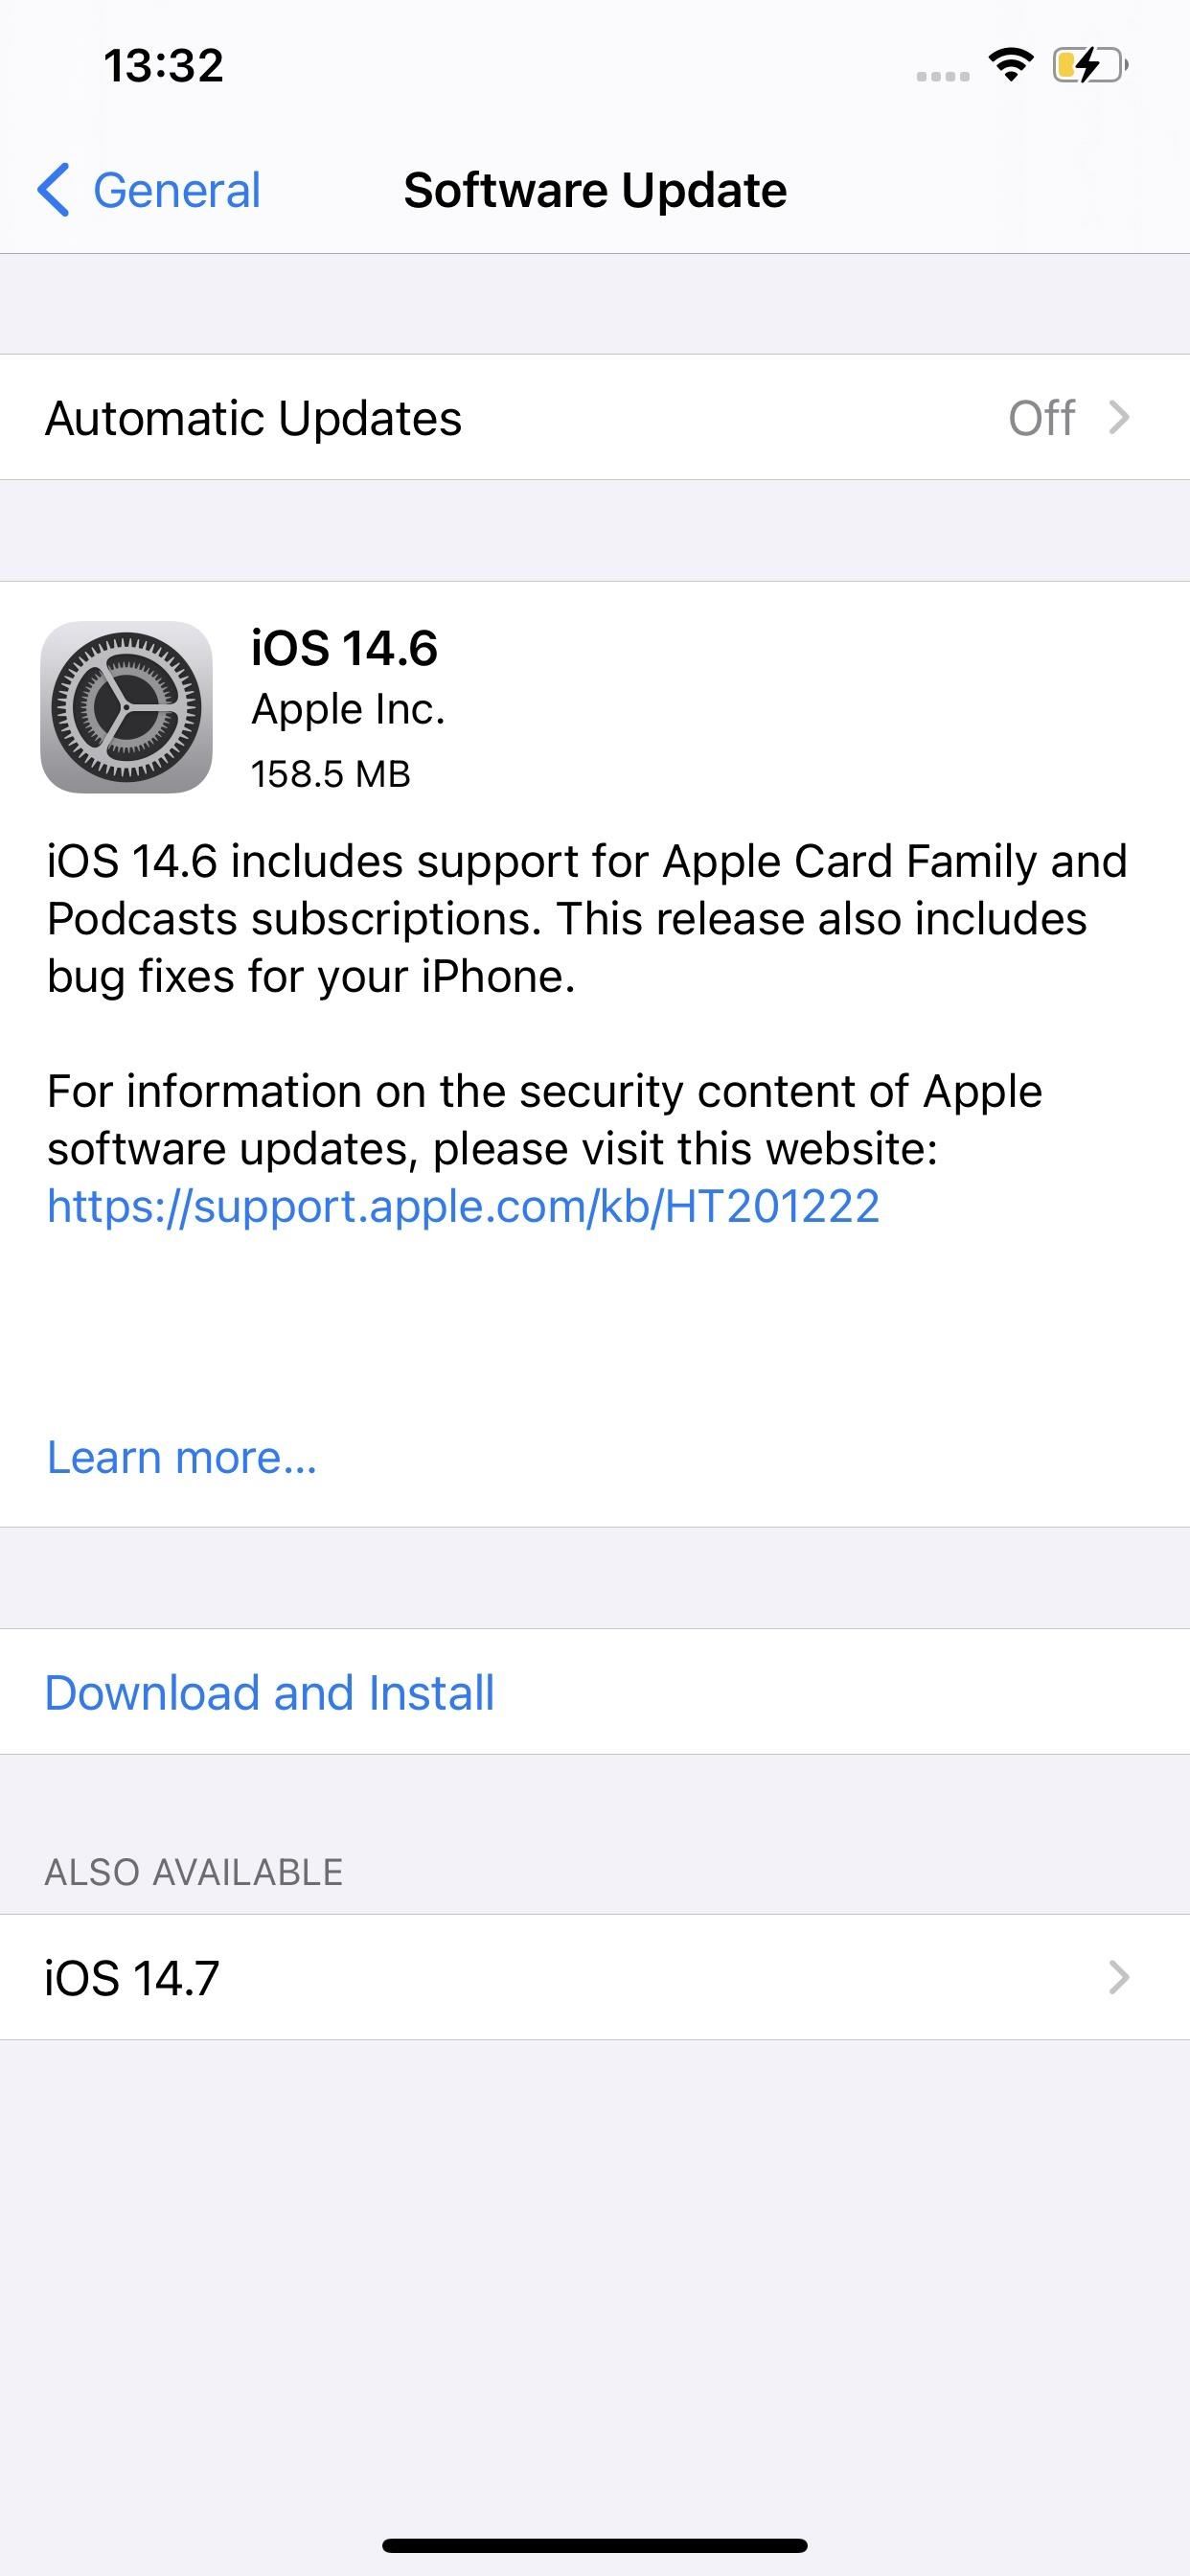 Apple's Second iOS 14.6 Release Candidate Available for iPhone Devs & Public Beta Testers